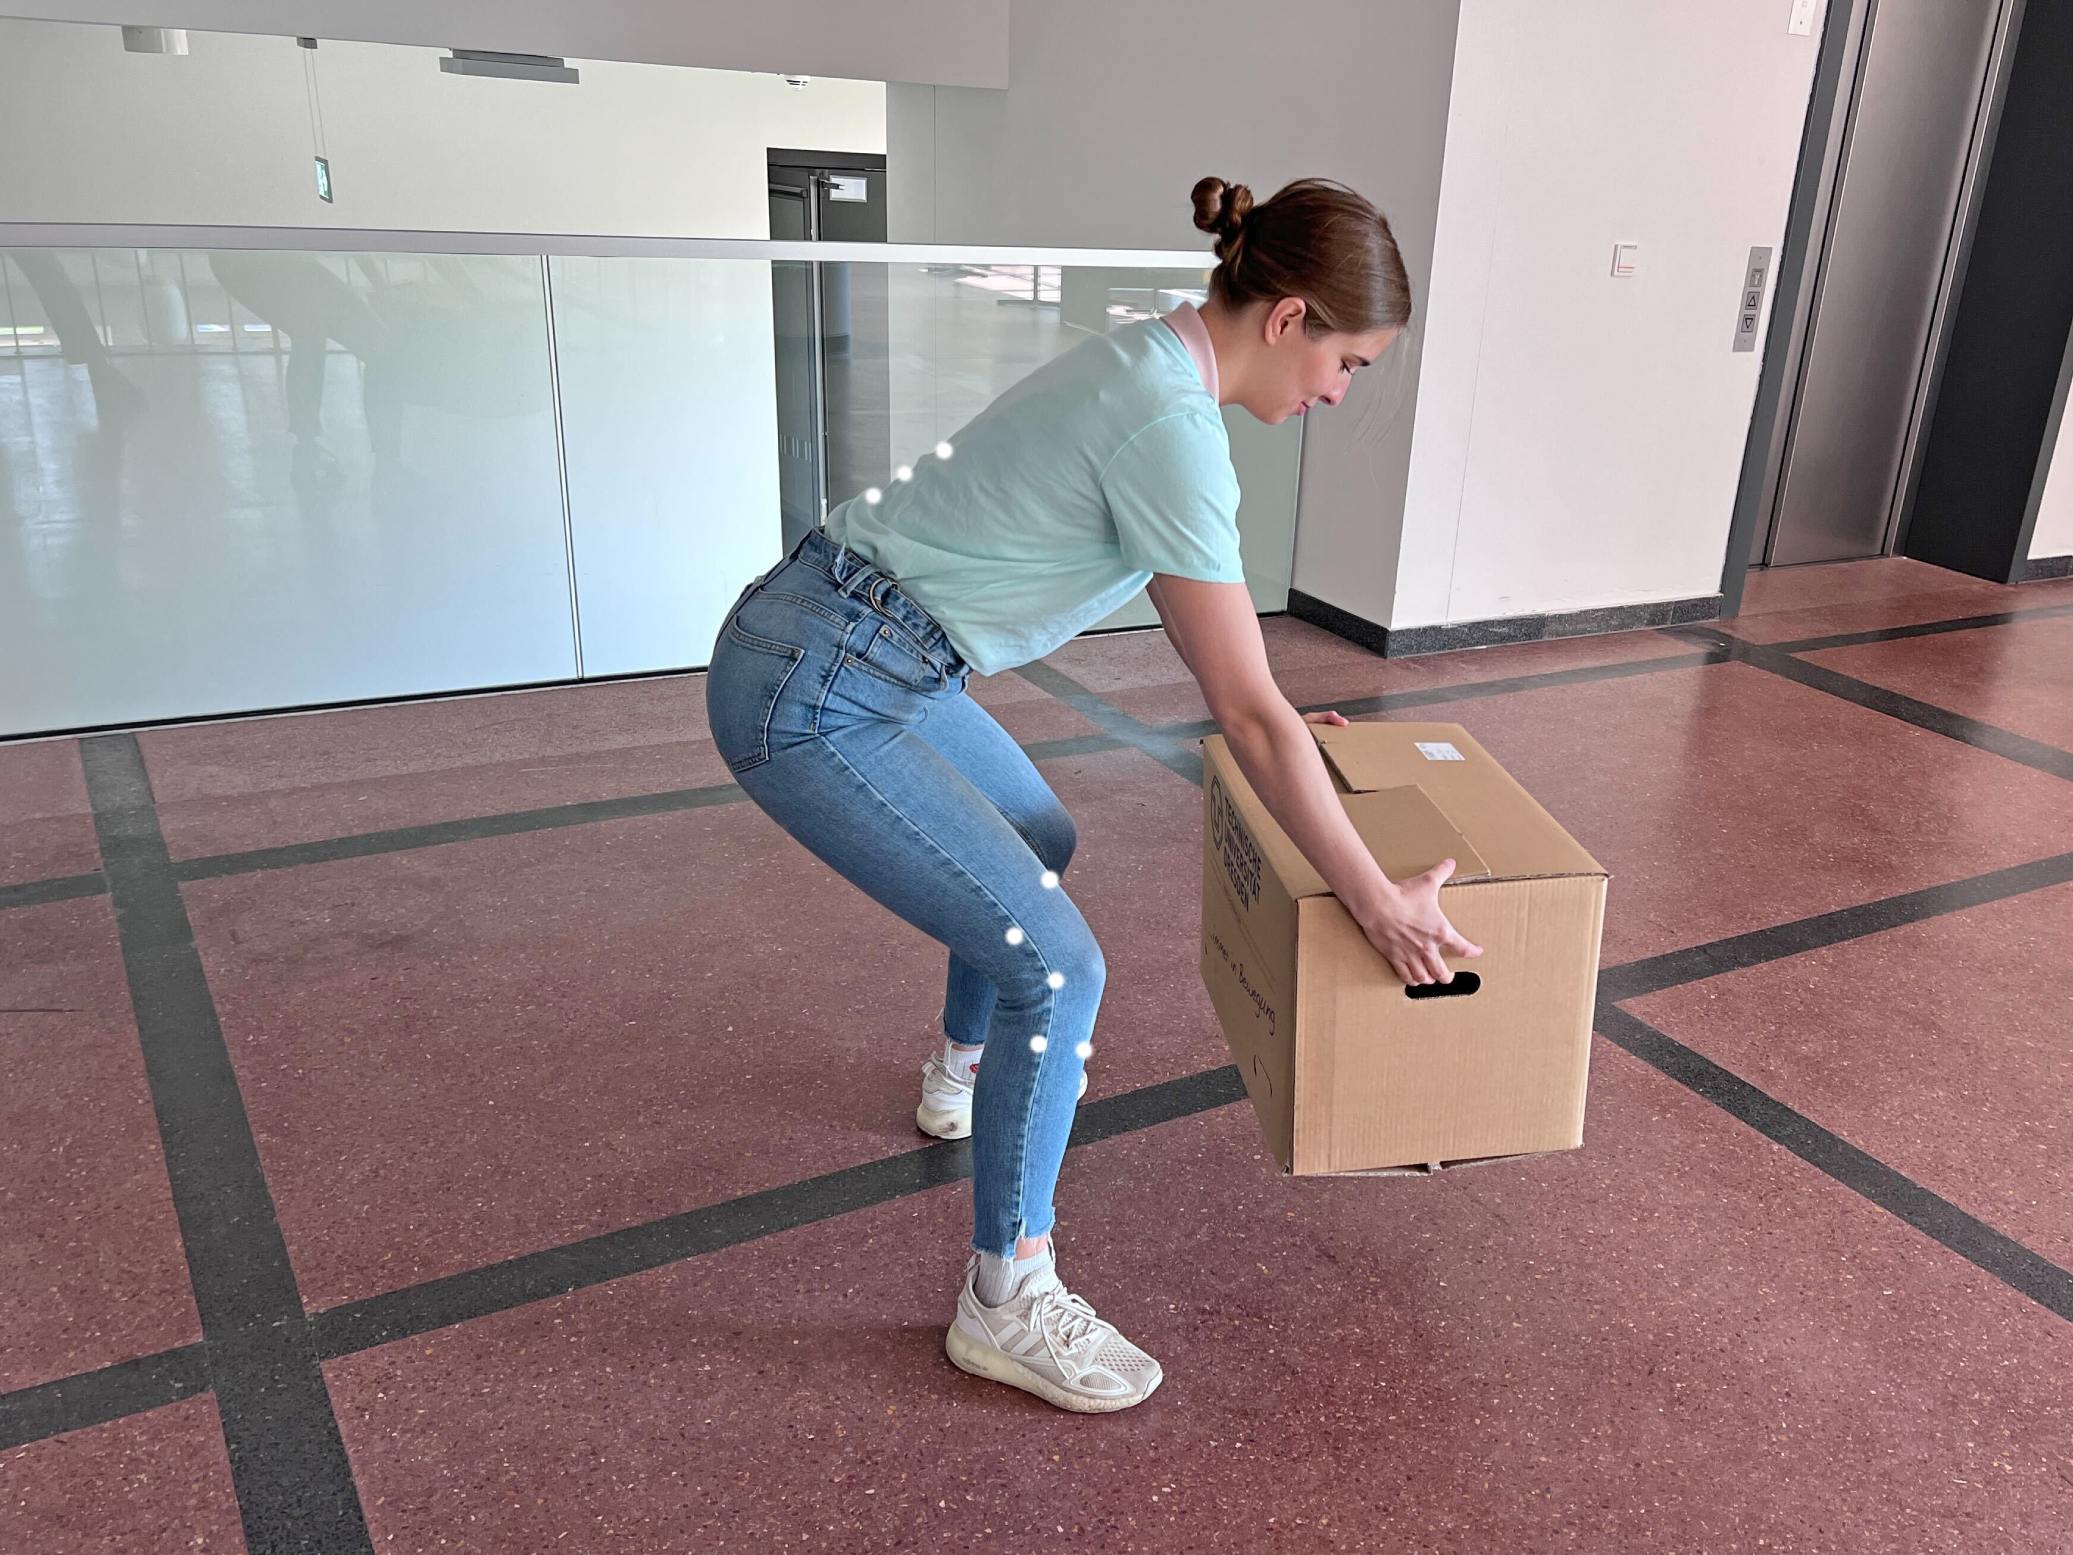 A girl lifting a cardboard box with a correct posture